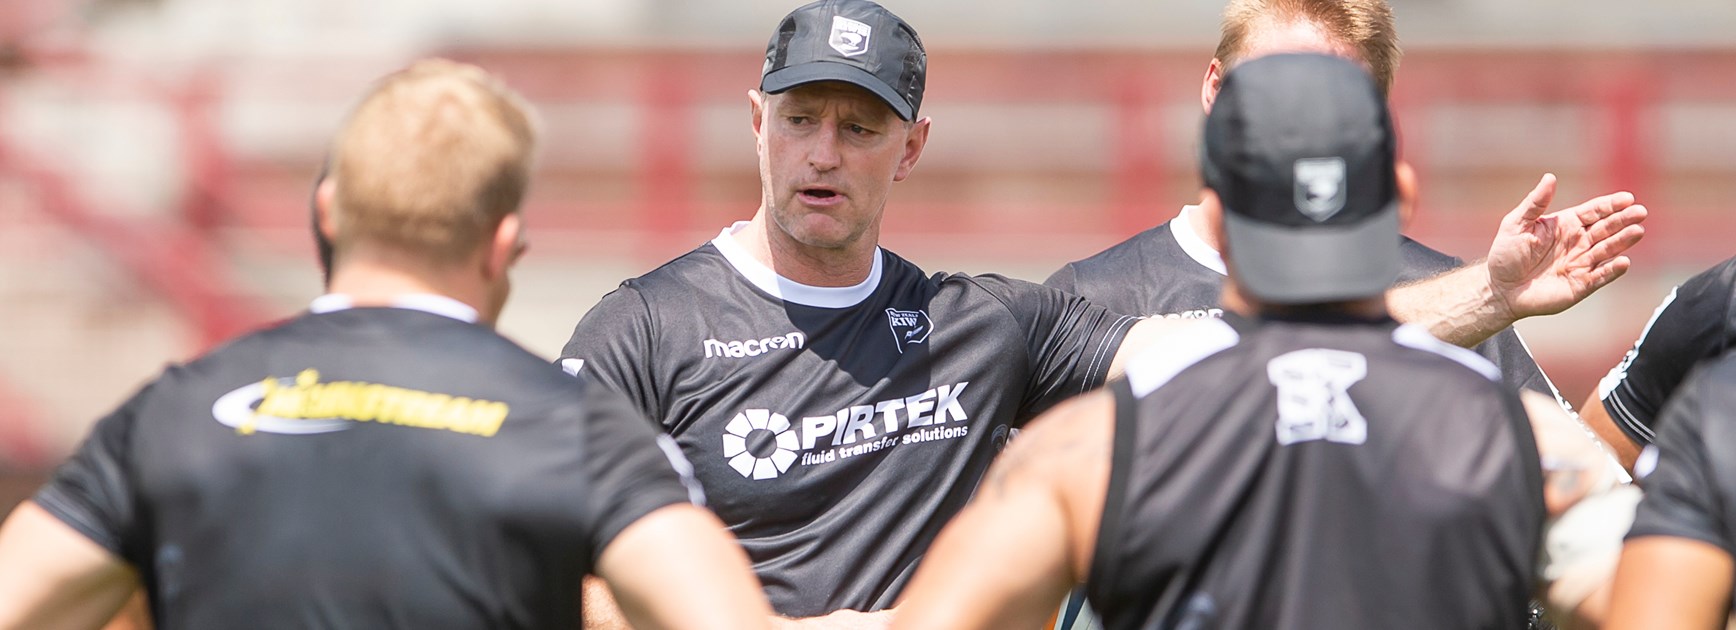 New Zealand coach Michael Maguire.